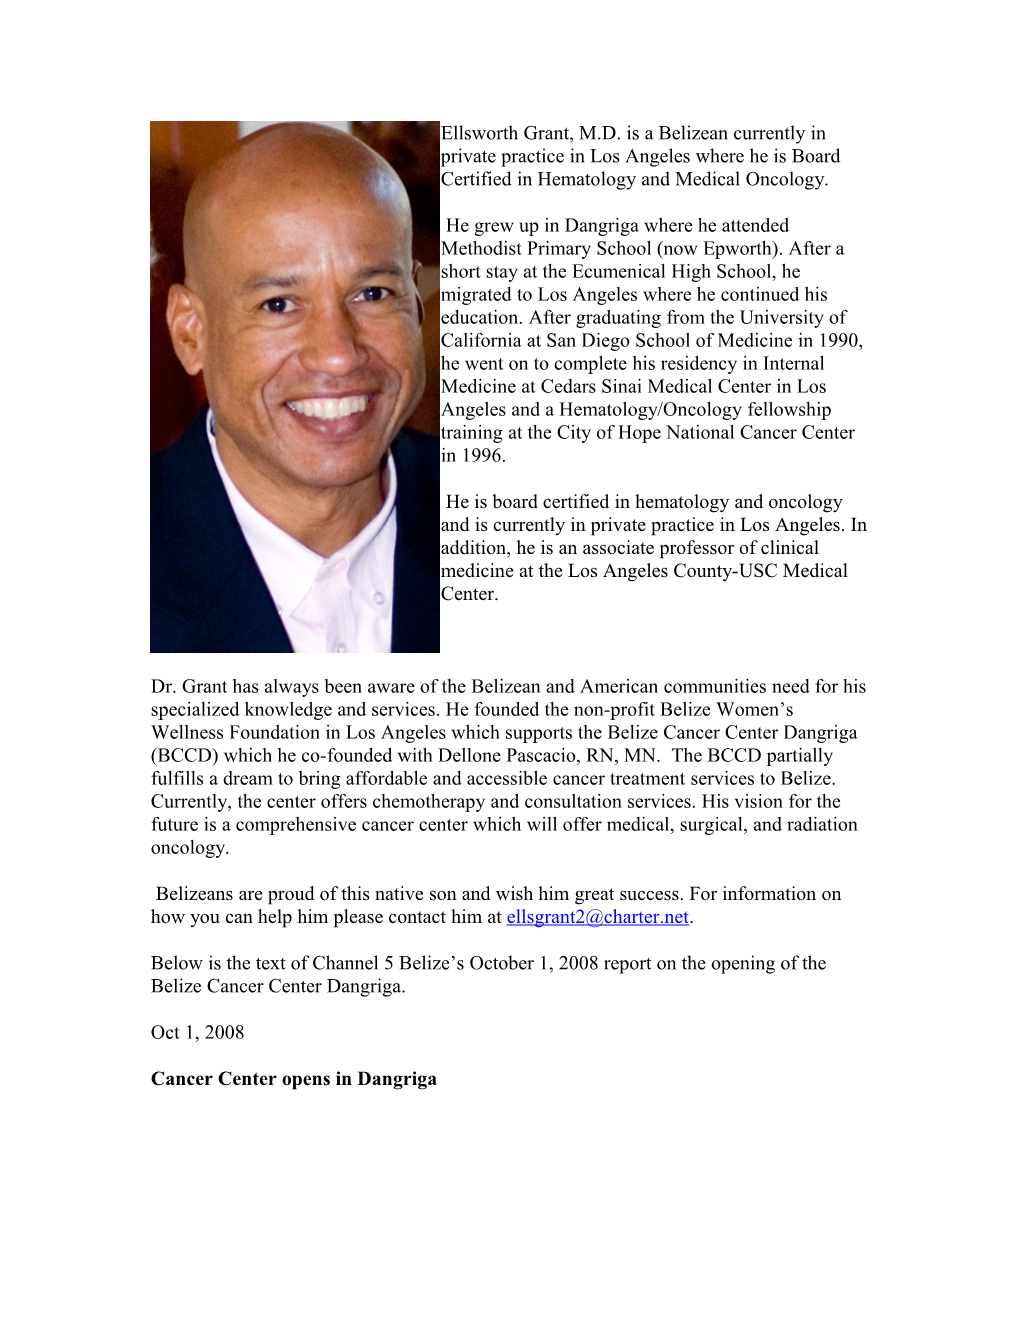 Ellsworth Grant, M.D. Is a Belizean Currently in Private Practice in Los Angeles Where